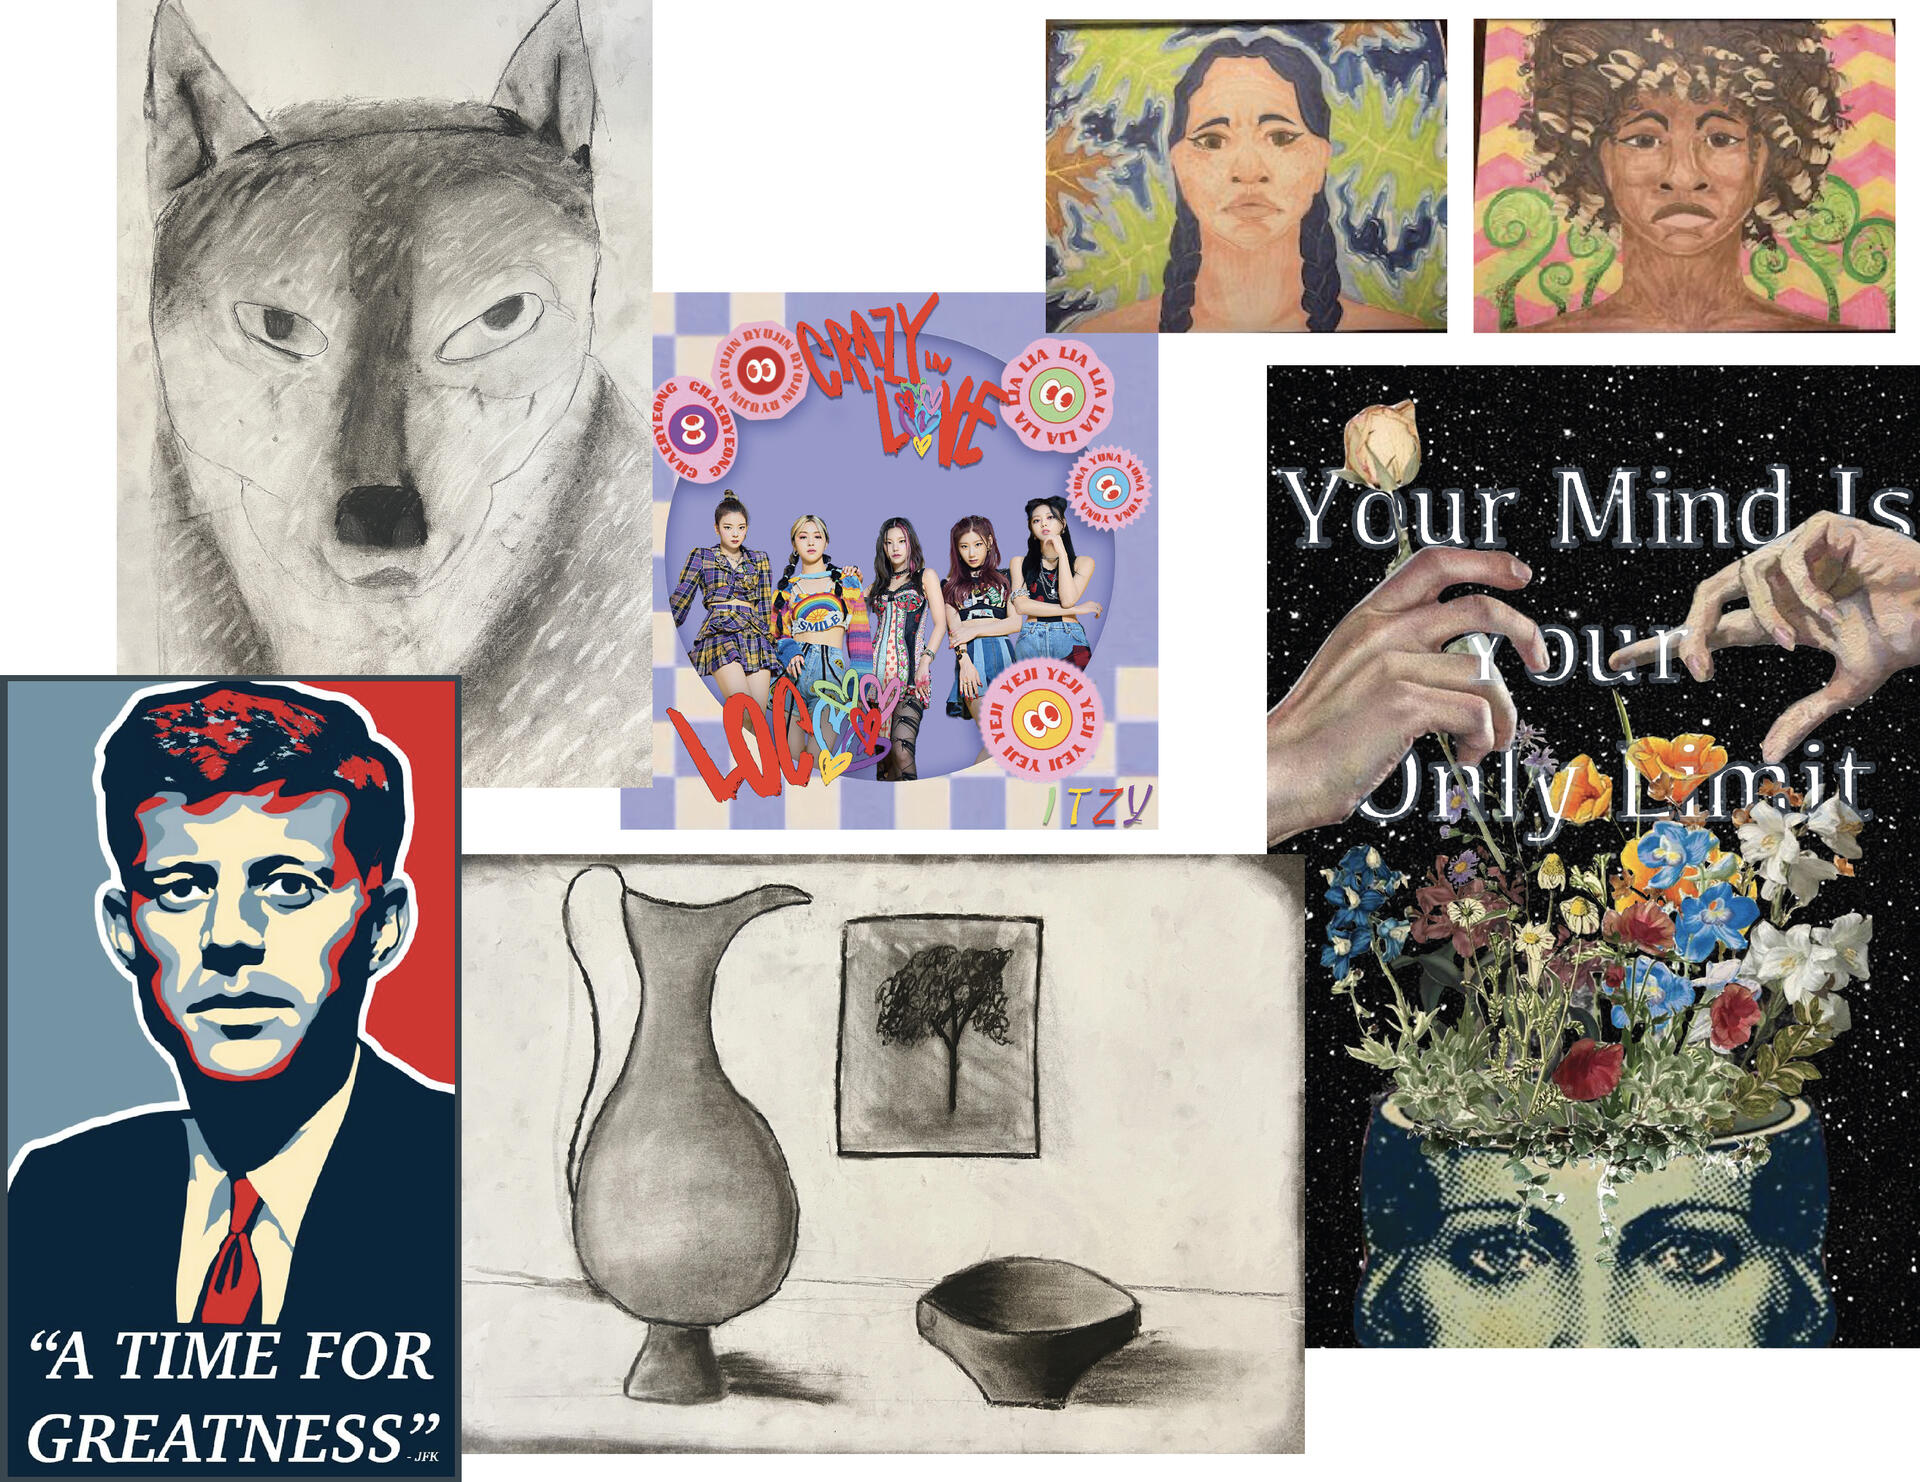 Selected works by high school students. Works range from digital posters to still life drawings to album covers. Students of all skill levels are represented. 